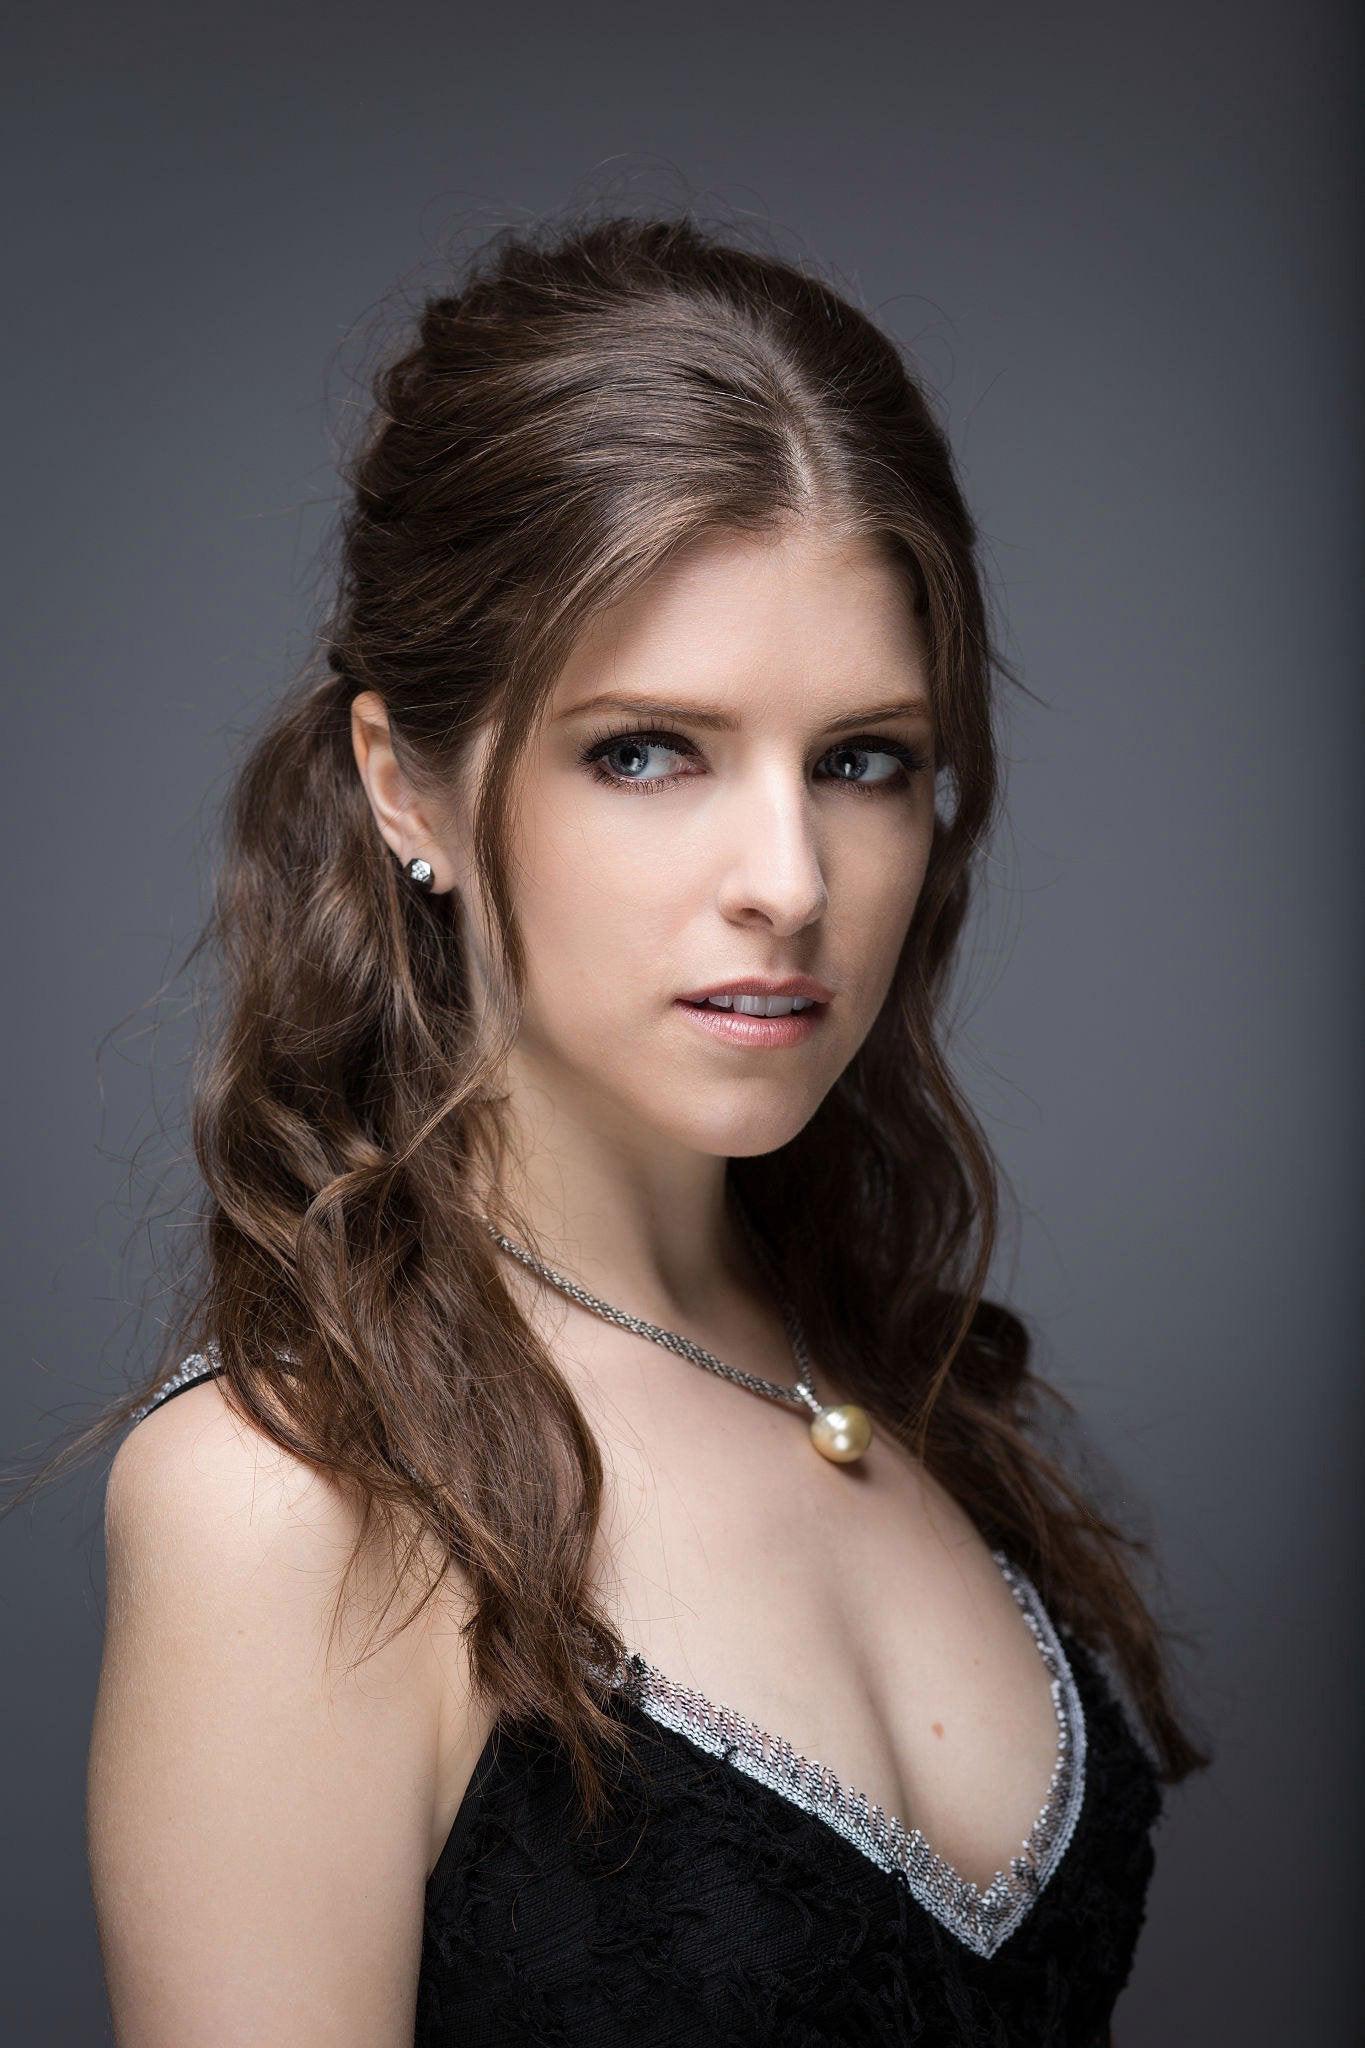 Anna Kendrick looking forward to what’s about to happen